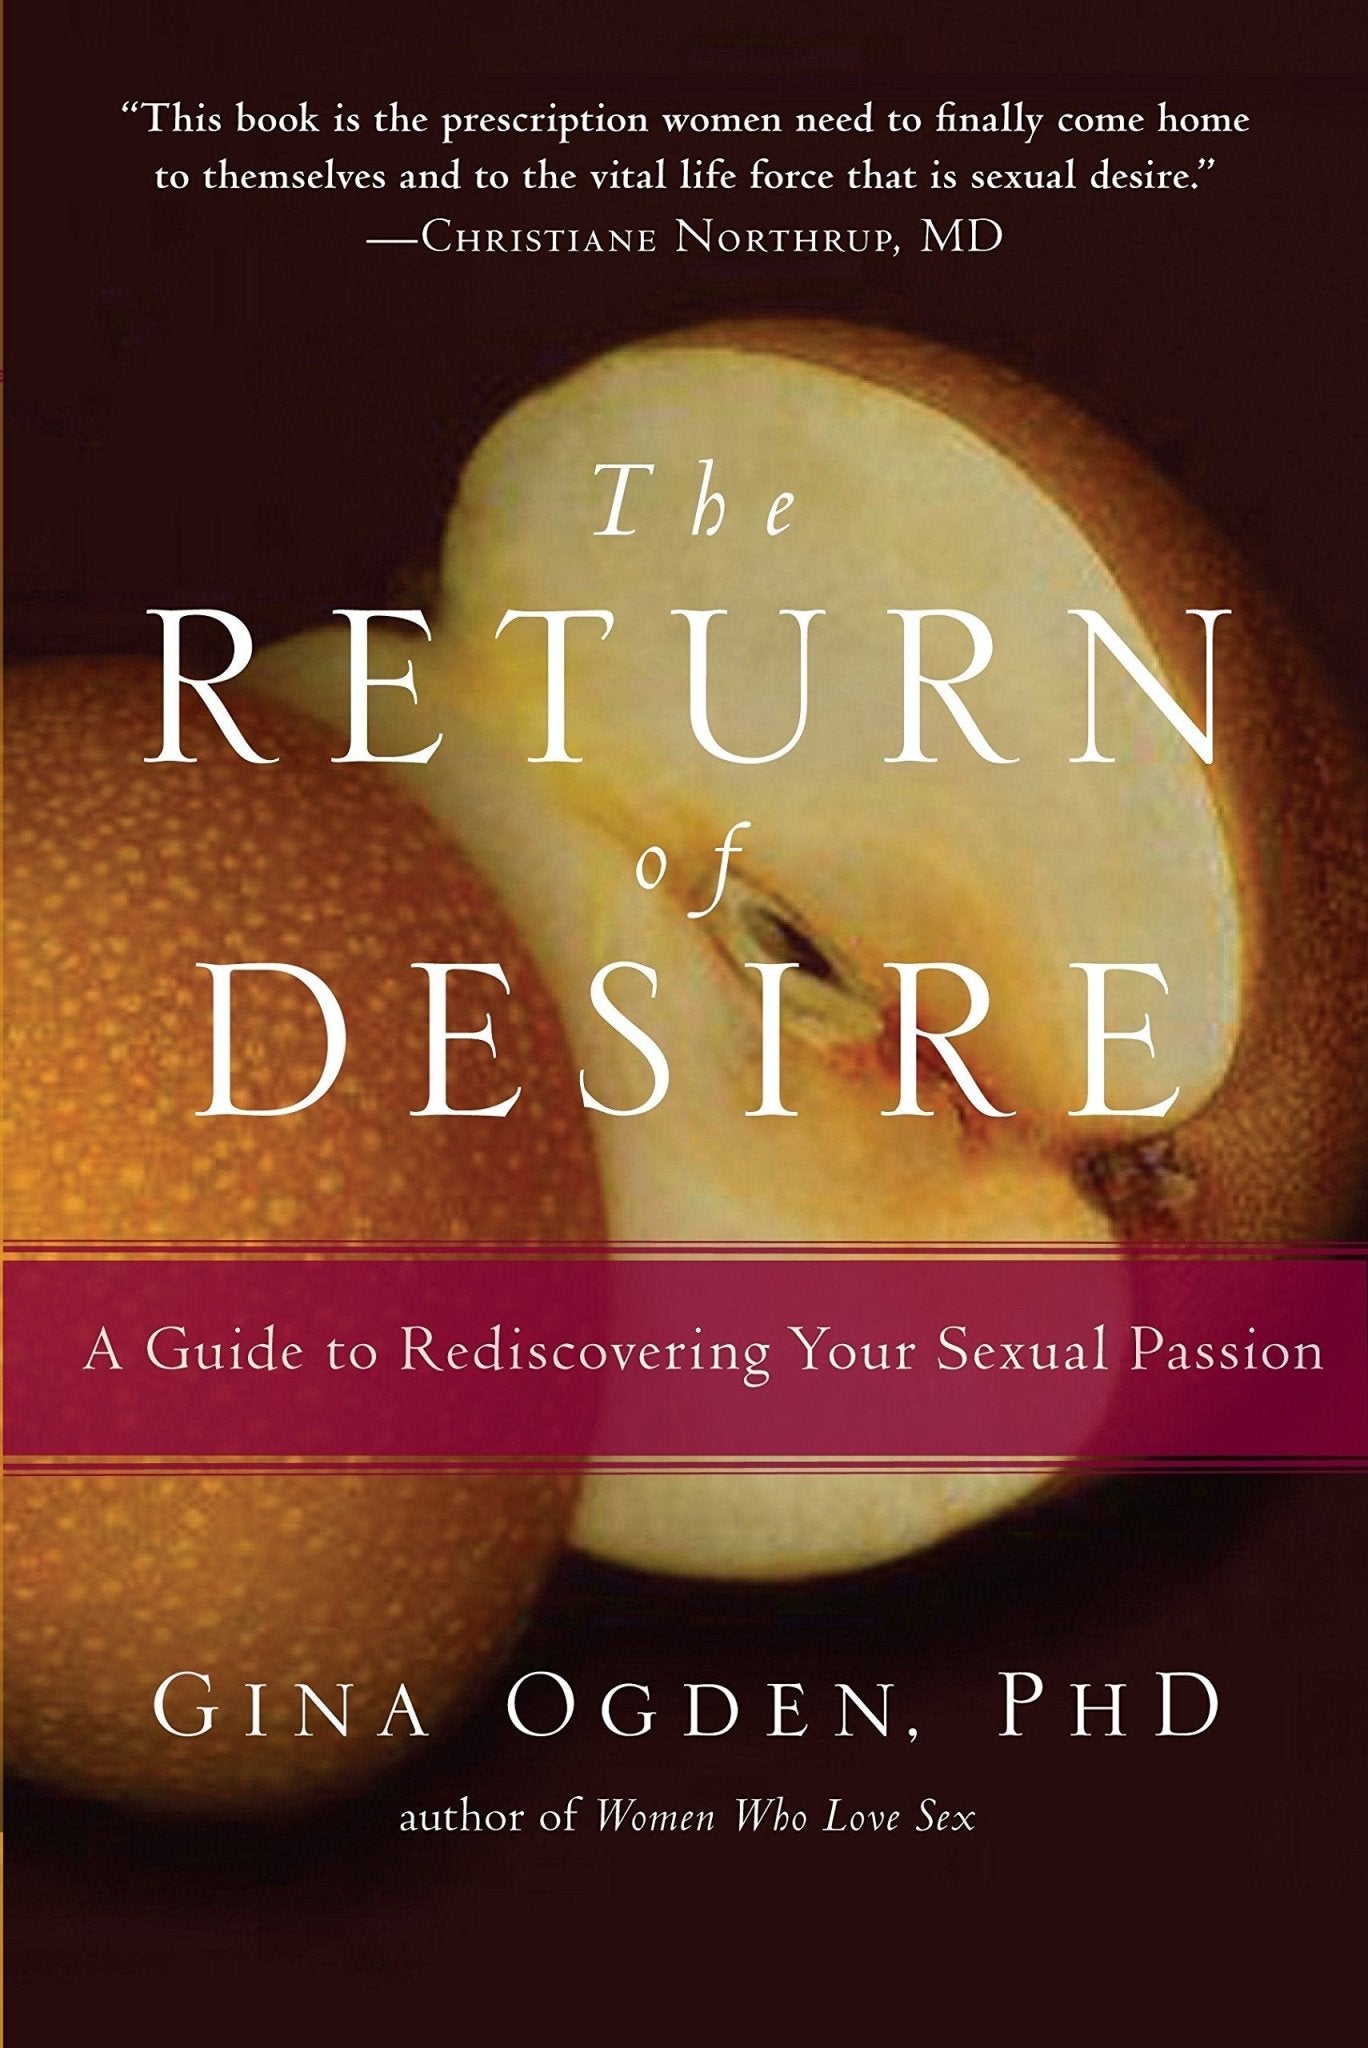 The Return of Desire: A Guide to Rediscovering Your Sexual Passion - Spiral Circle